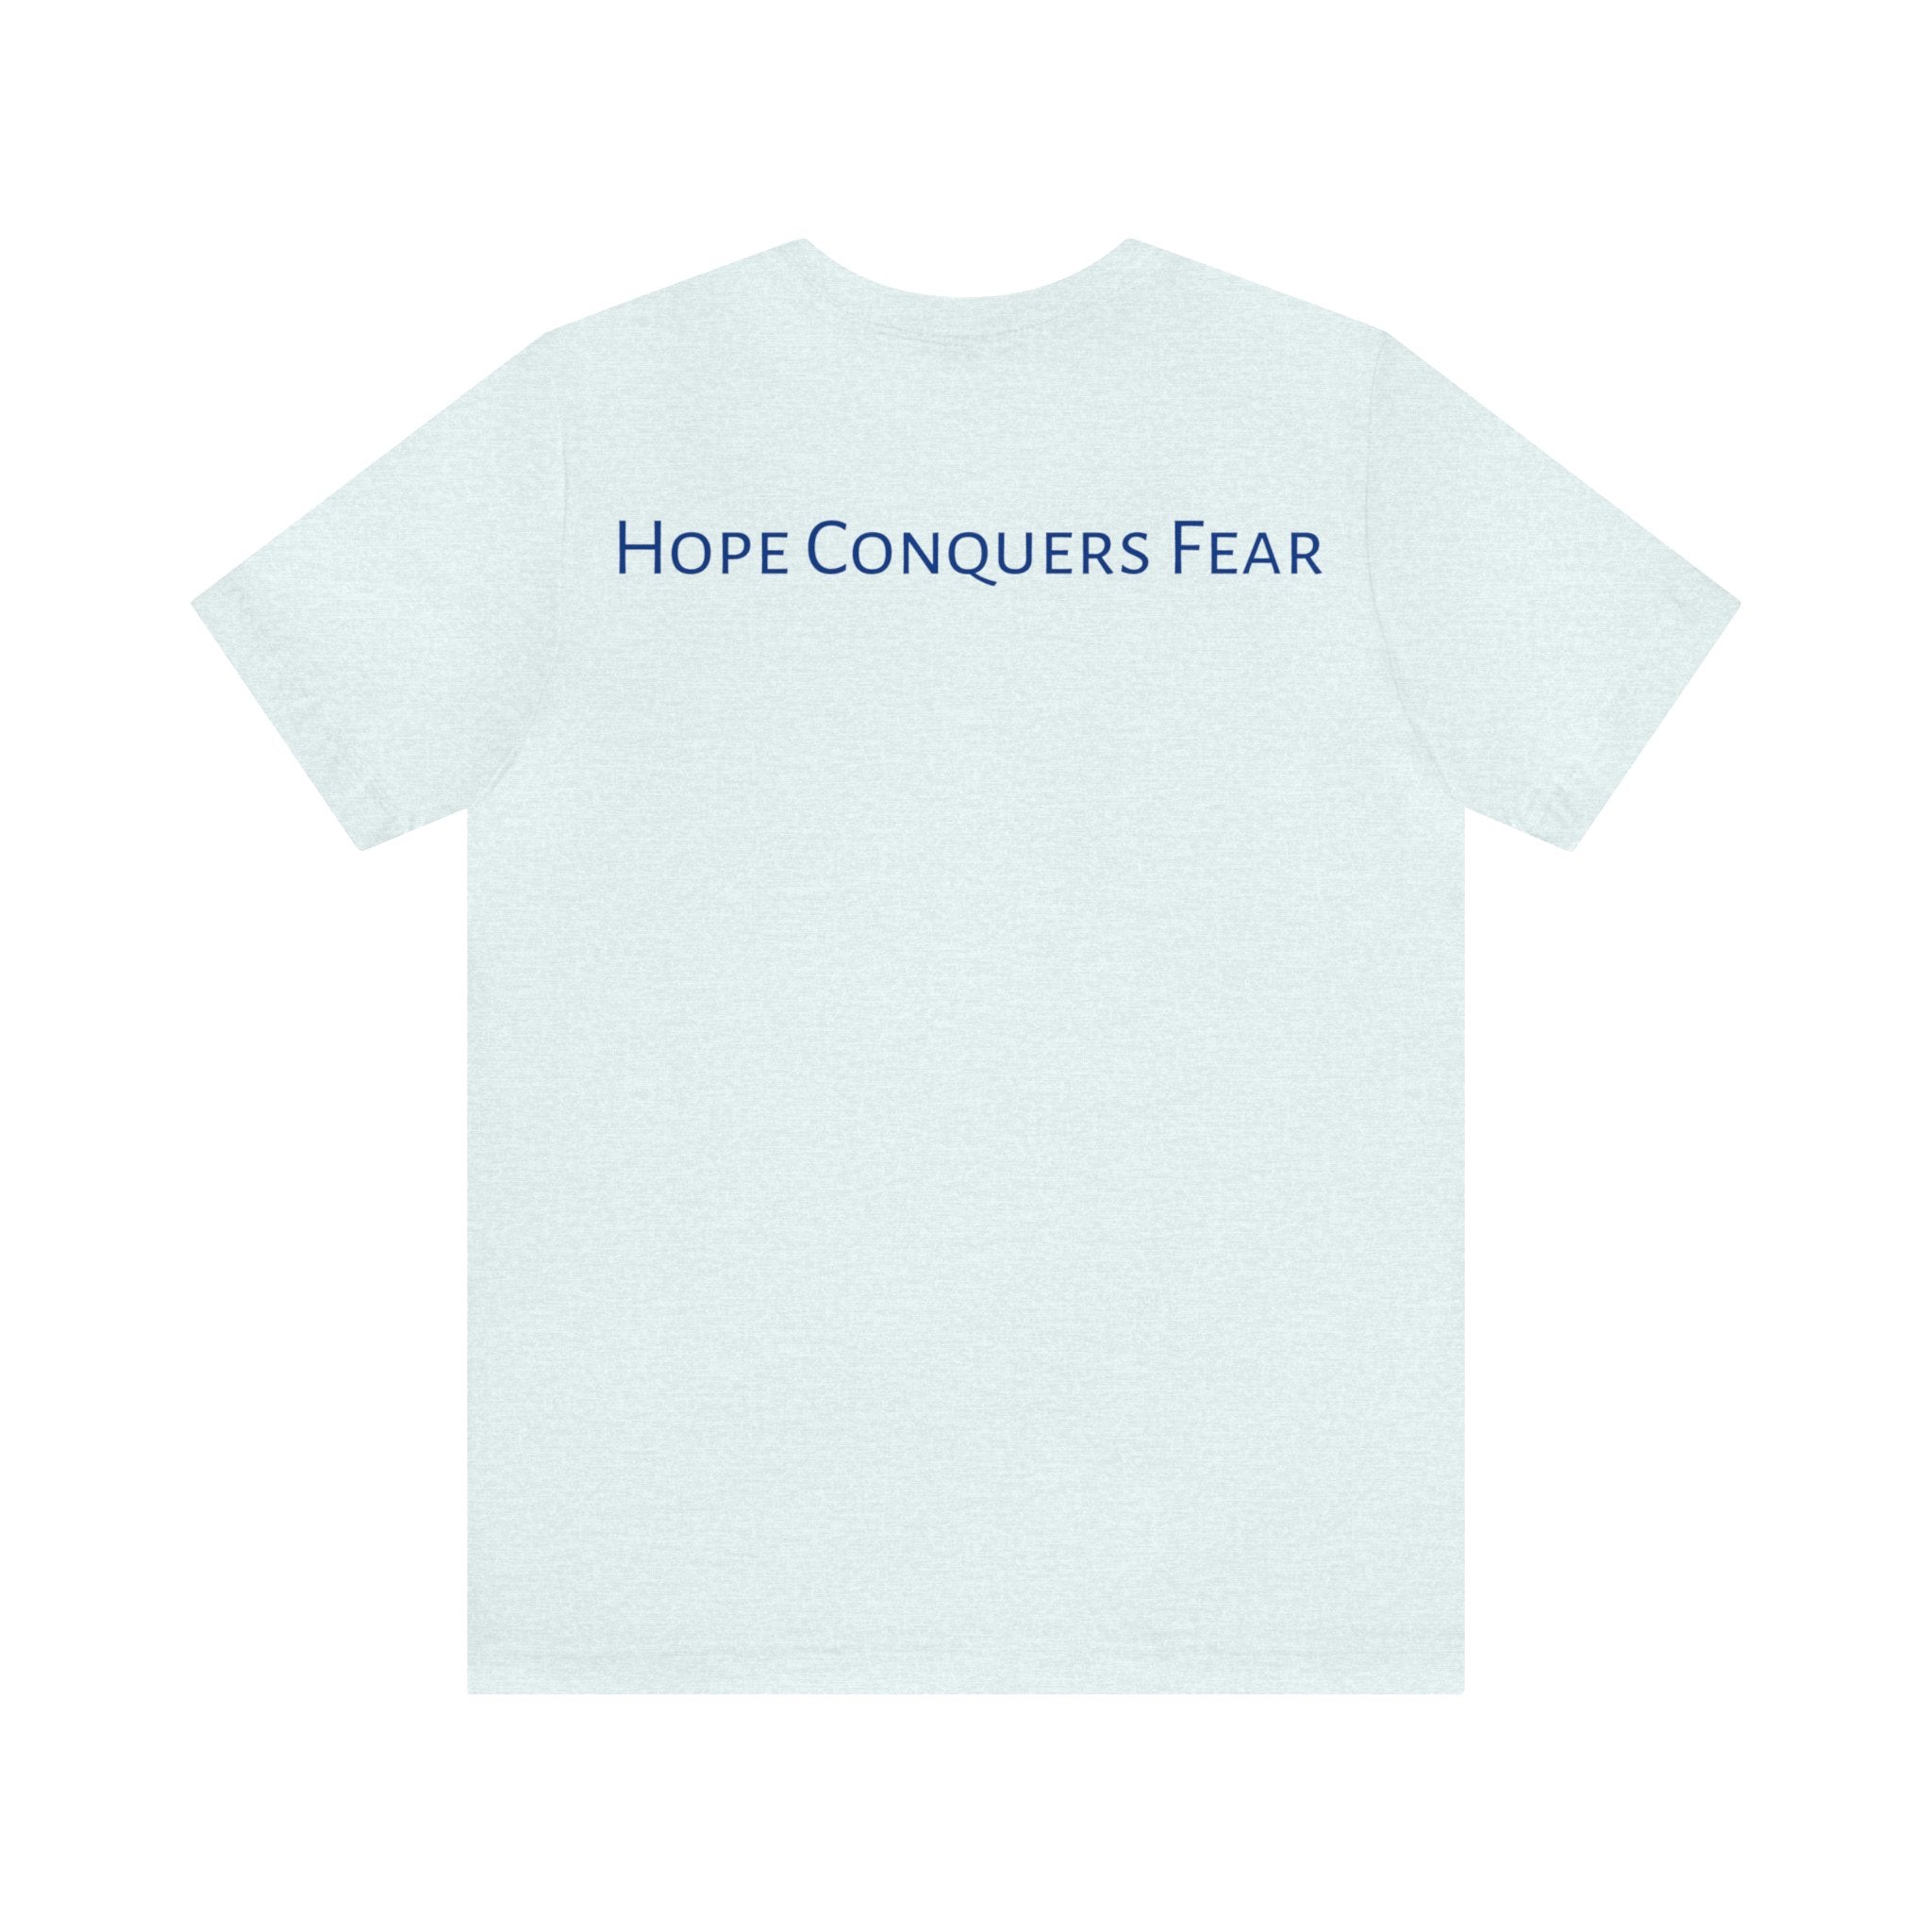 Hope Conquers Fear Jersey Tee - Bella+Canvas 3001 Heather Ice Blue Airlume Cotton Bella+Canvas 3001 Crew Neckline Jersey Short Sleeve Lightweight Fabric Mental Health Support Retail Fit Tear-away Label Tee Unisex Tee T-Shirt 1614976648834653817_2048 Printify